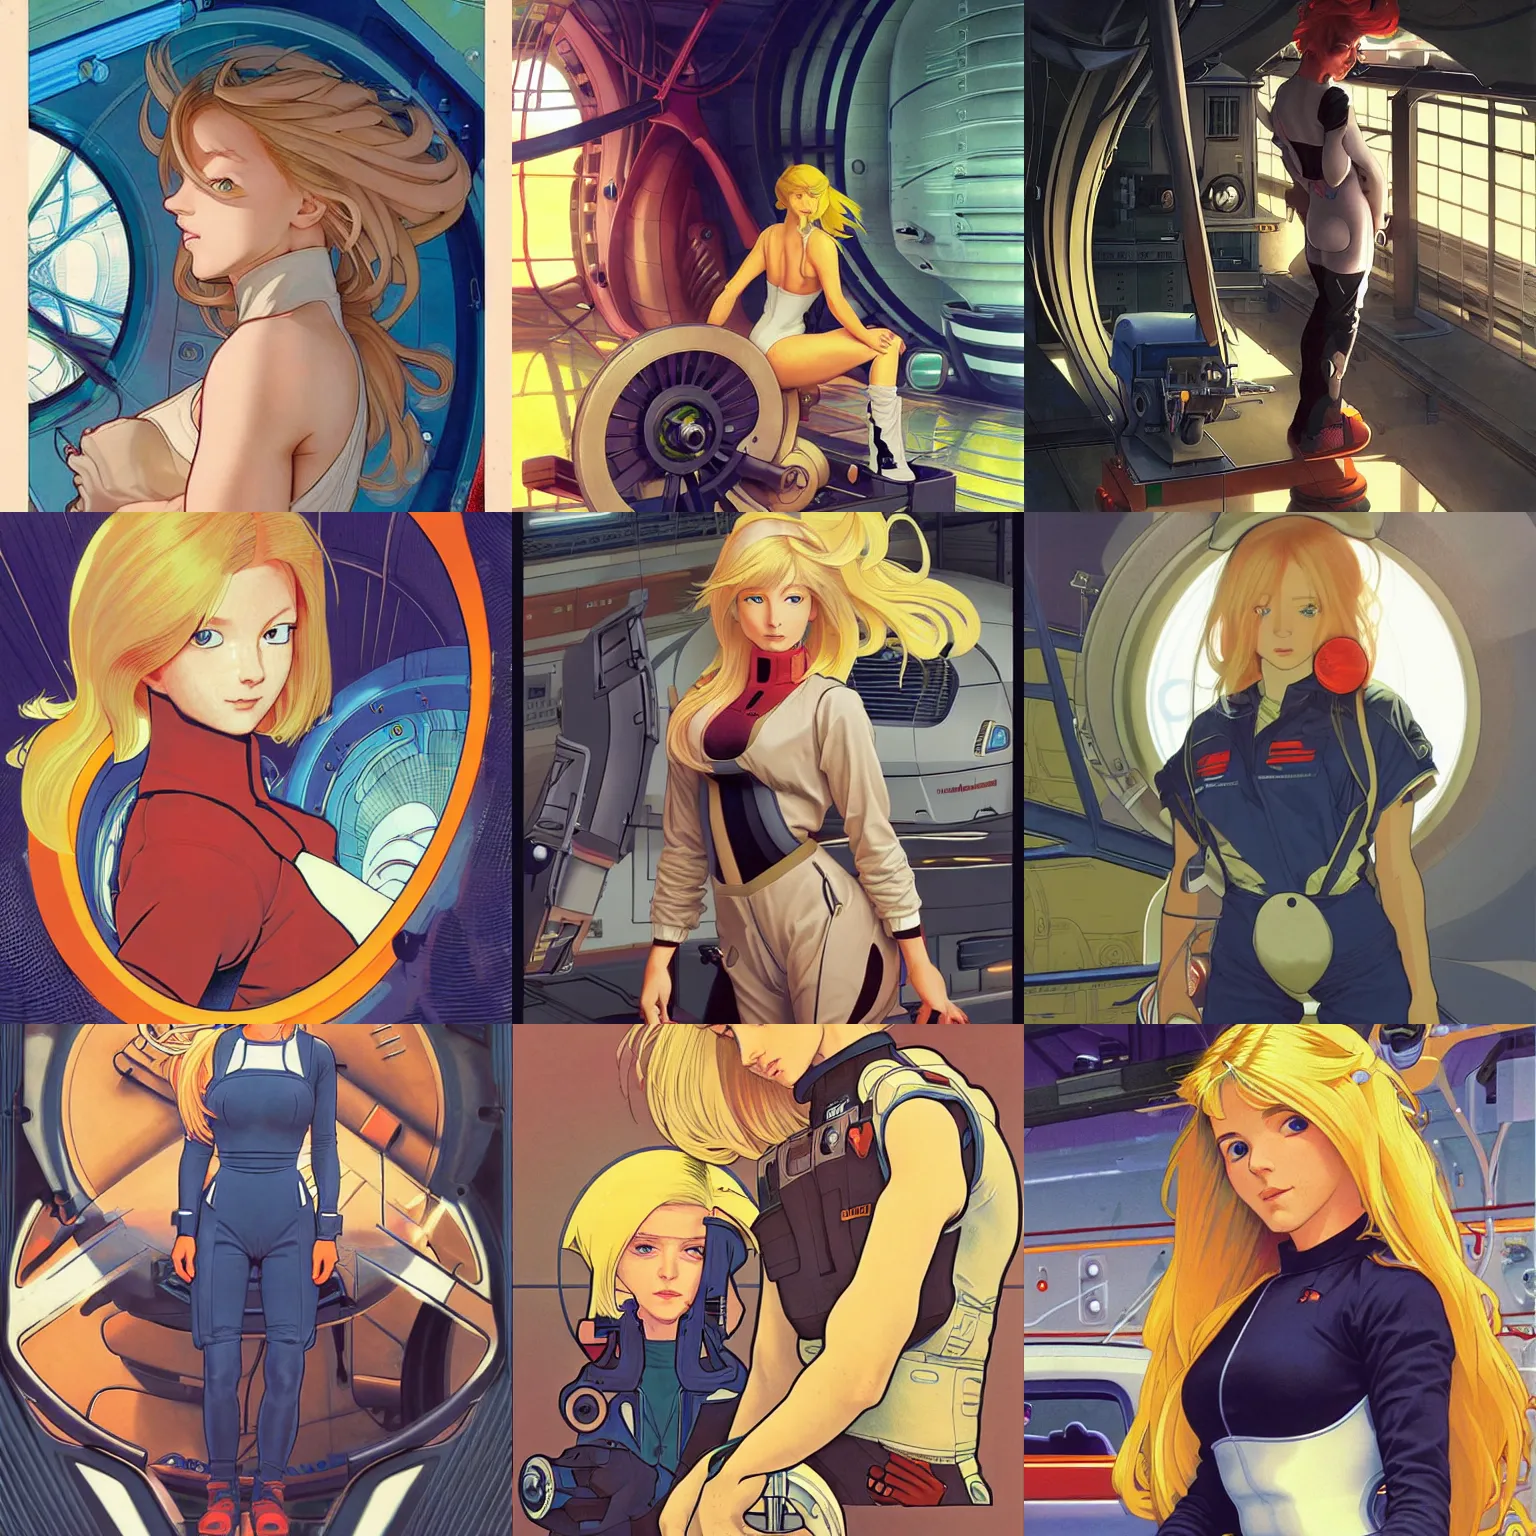 Prompt: a mechanic working in a busy starship hanger, retrofuturism, finely illustrated face, long blonde hair, bodysuit, highly detailed, colored pencil, gainax, tankobon, in the style of ilya kuvshinov and yoshiyuki sadamoto and william - adolphe bouguereau and alphonse mucha